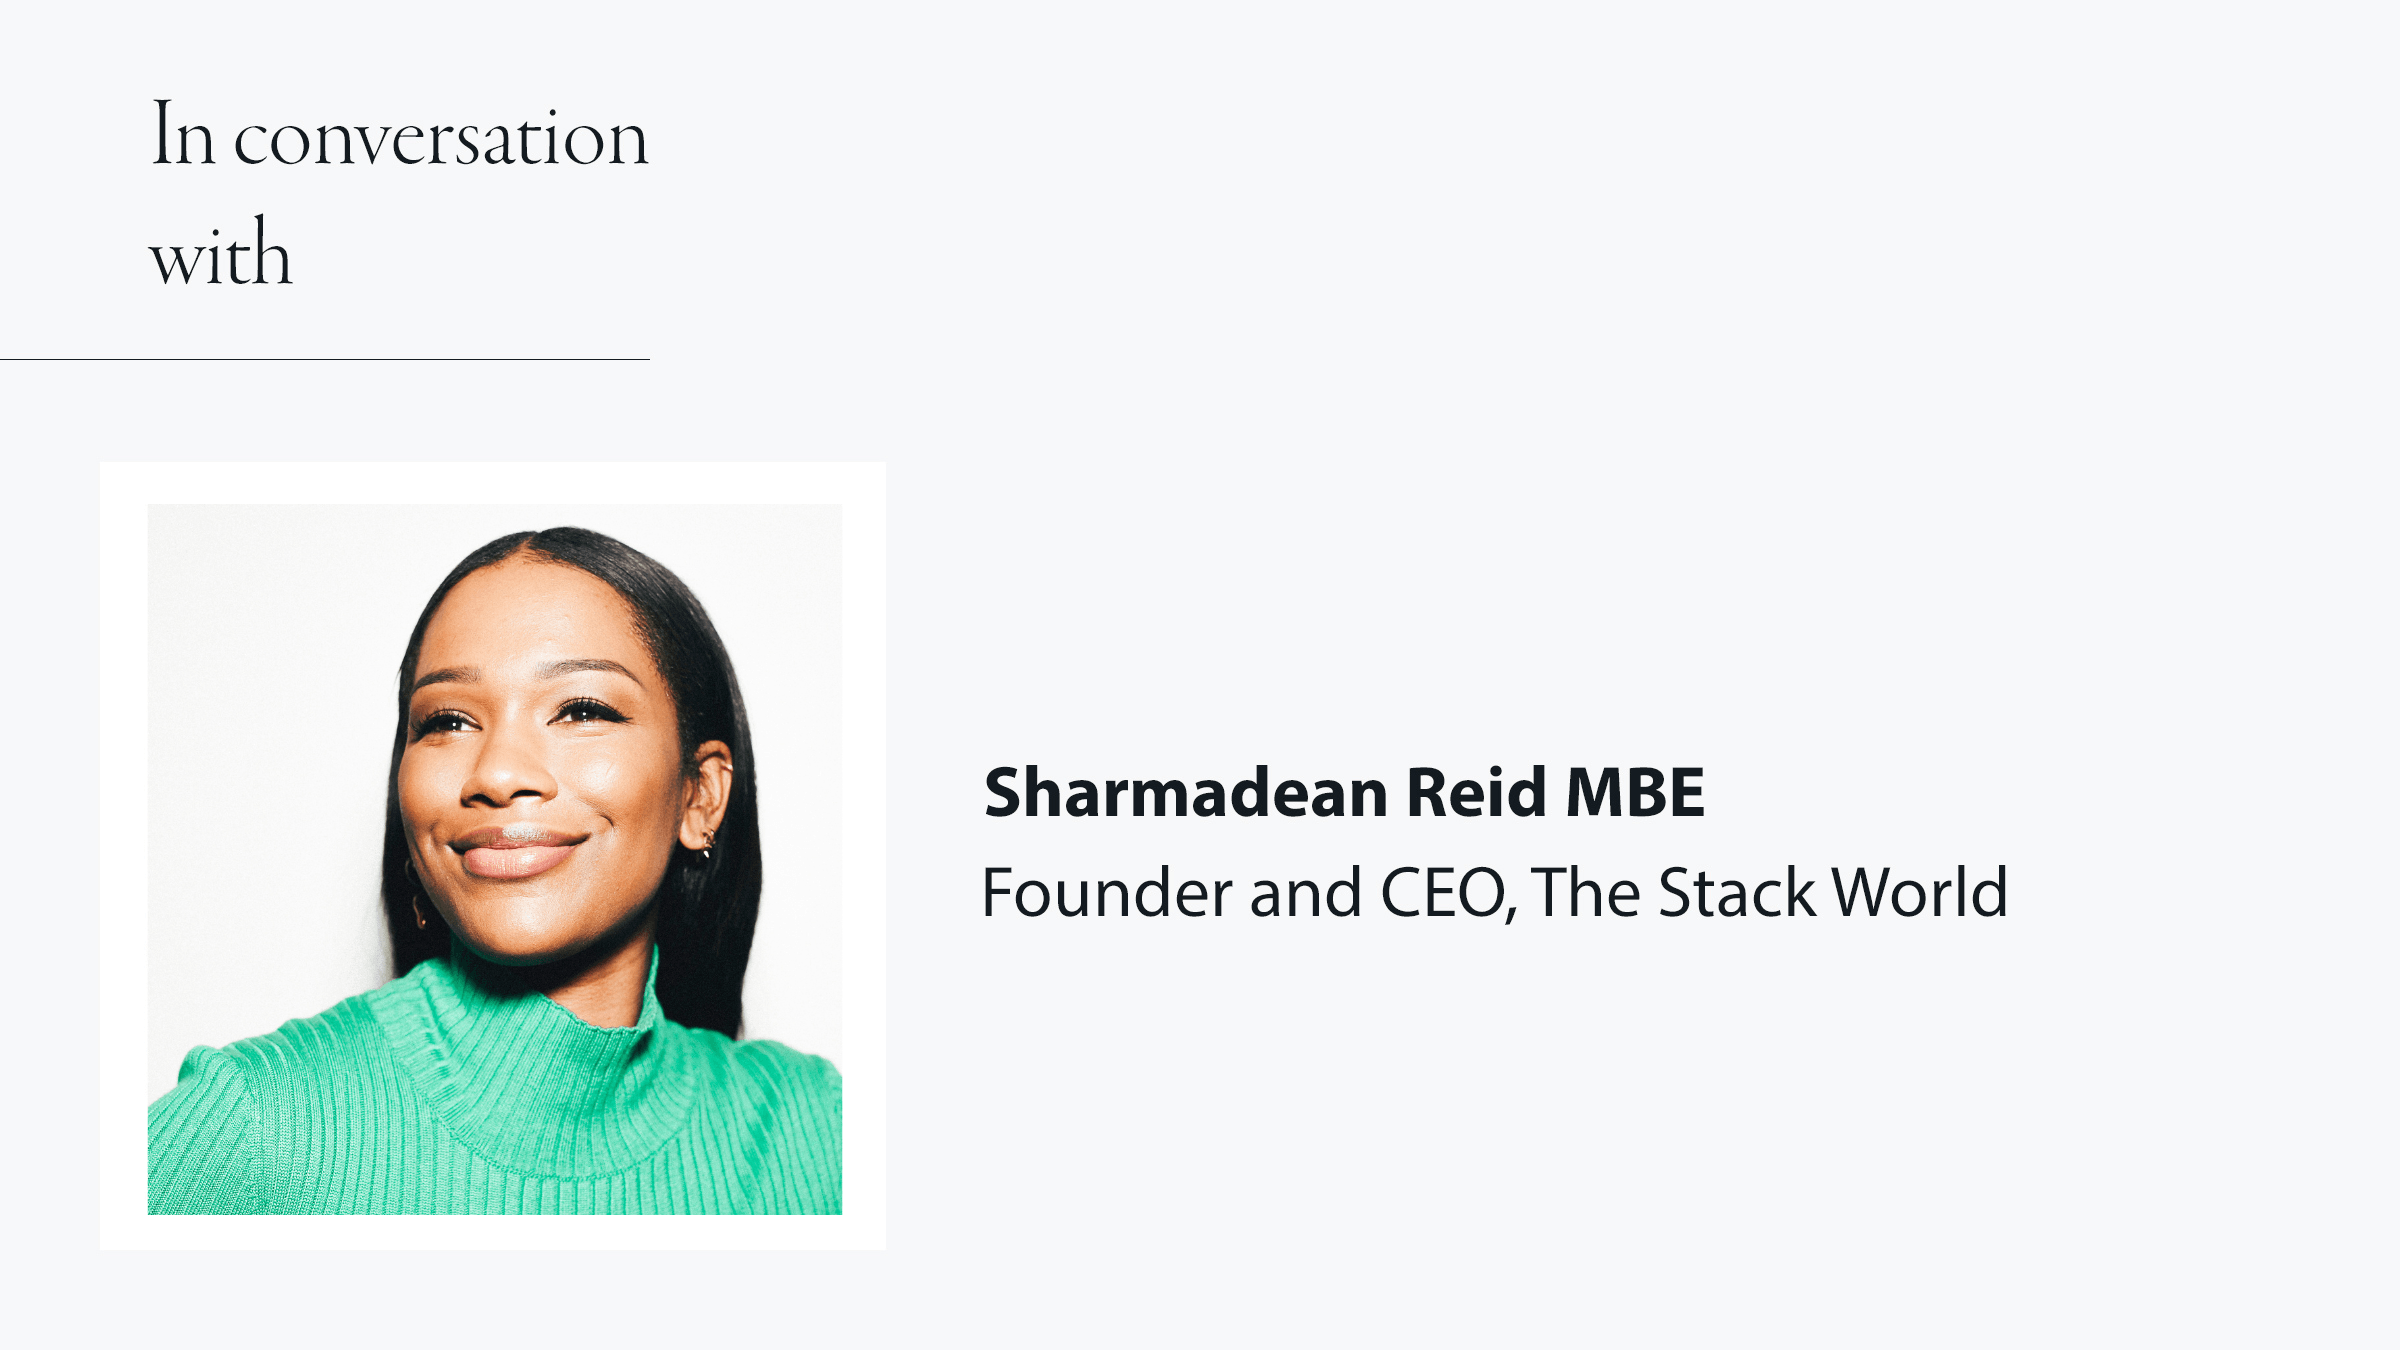 In conversation with Sharmadean Reid, Founder & CEO at The Stack World